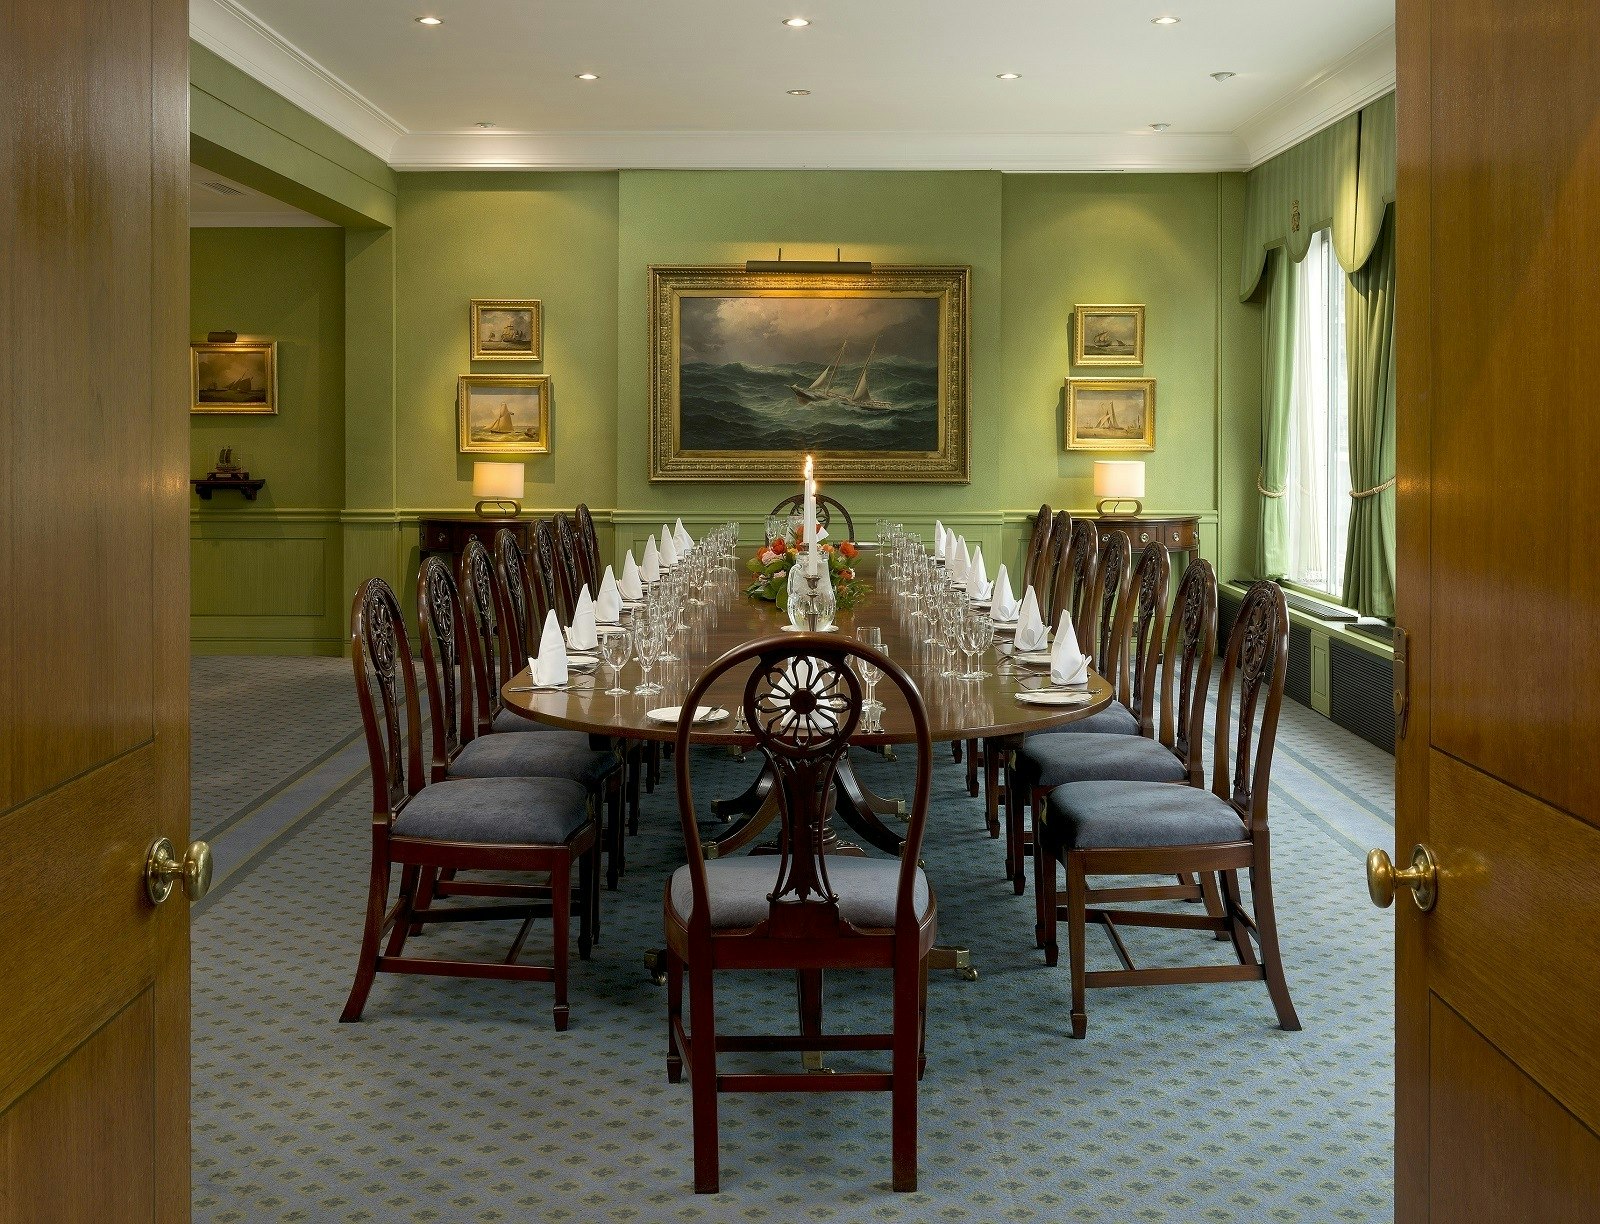 Formal Event Venues in London - The Royal Thames Yacht Club  - Other in Edinburgh Room  - Banner